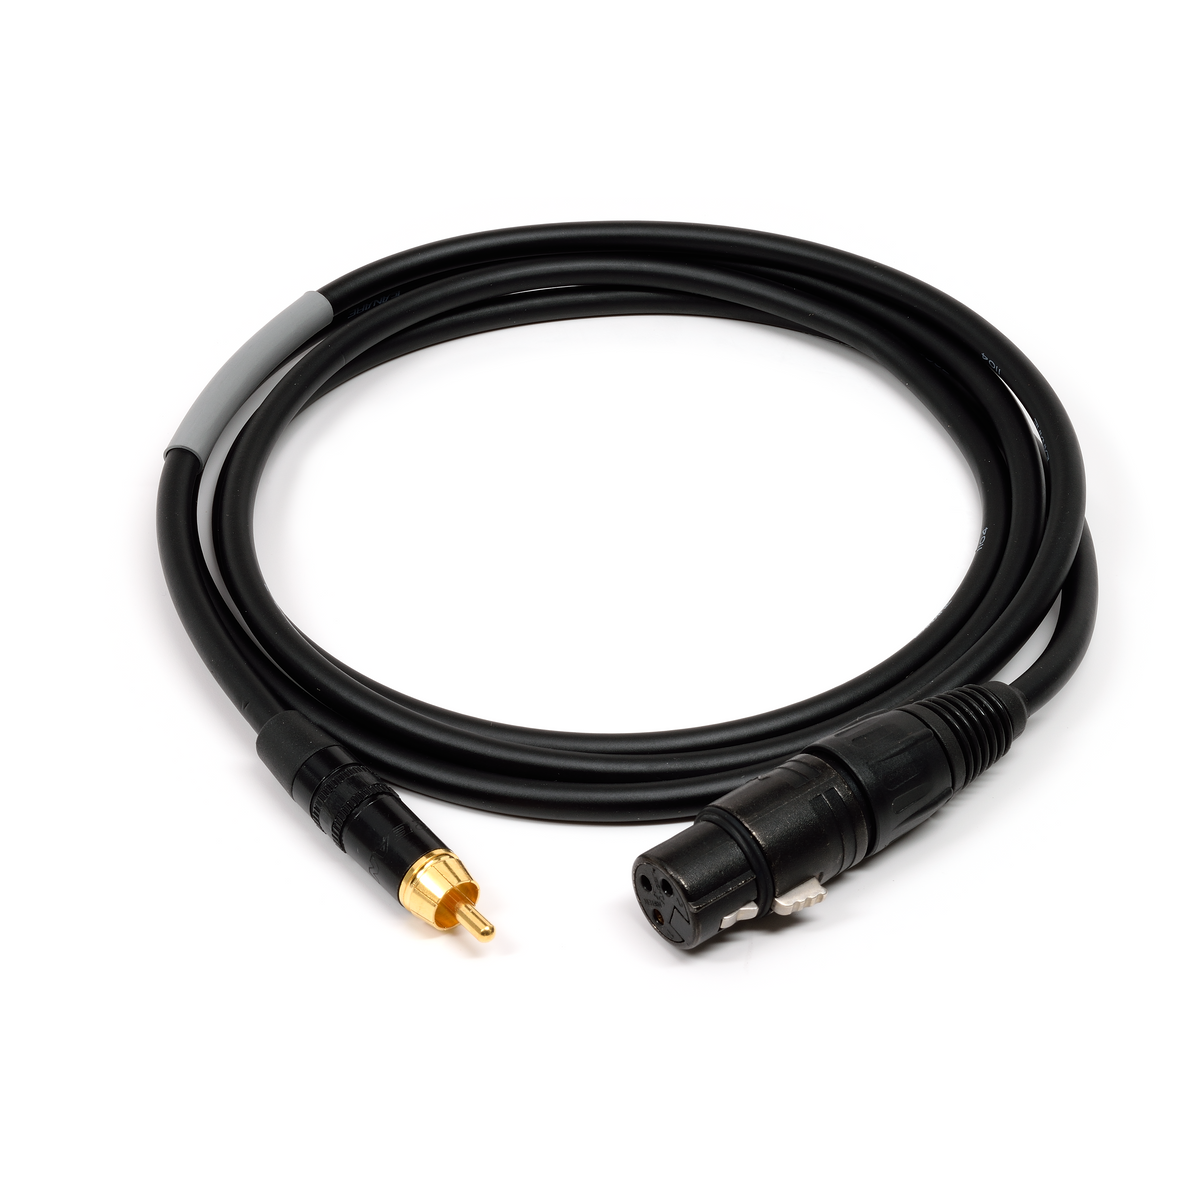 Benchmark XLRF to RCA Adapter Cable for Analog Audio - pin 3 floating